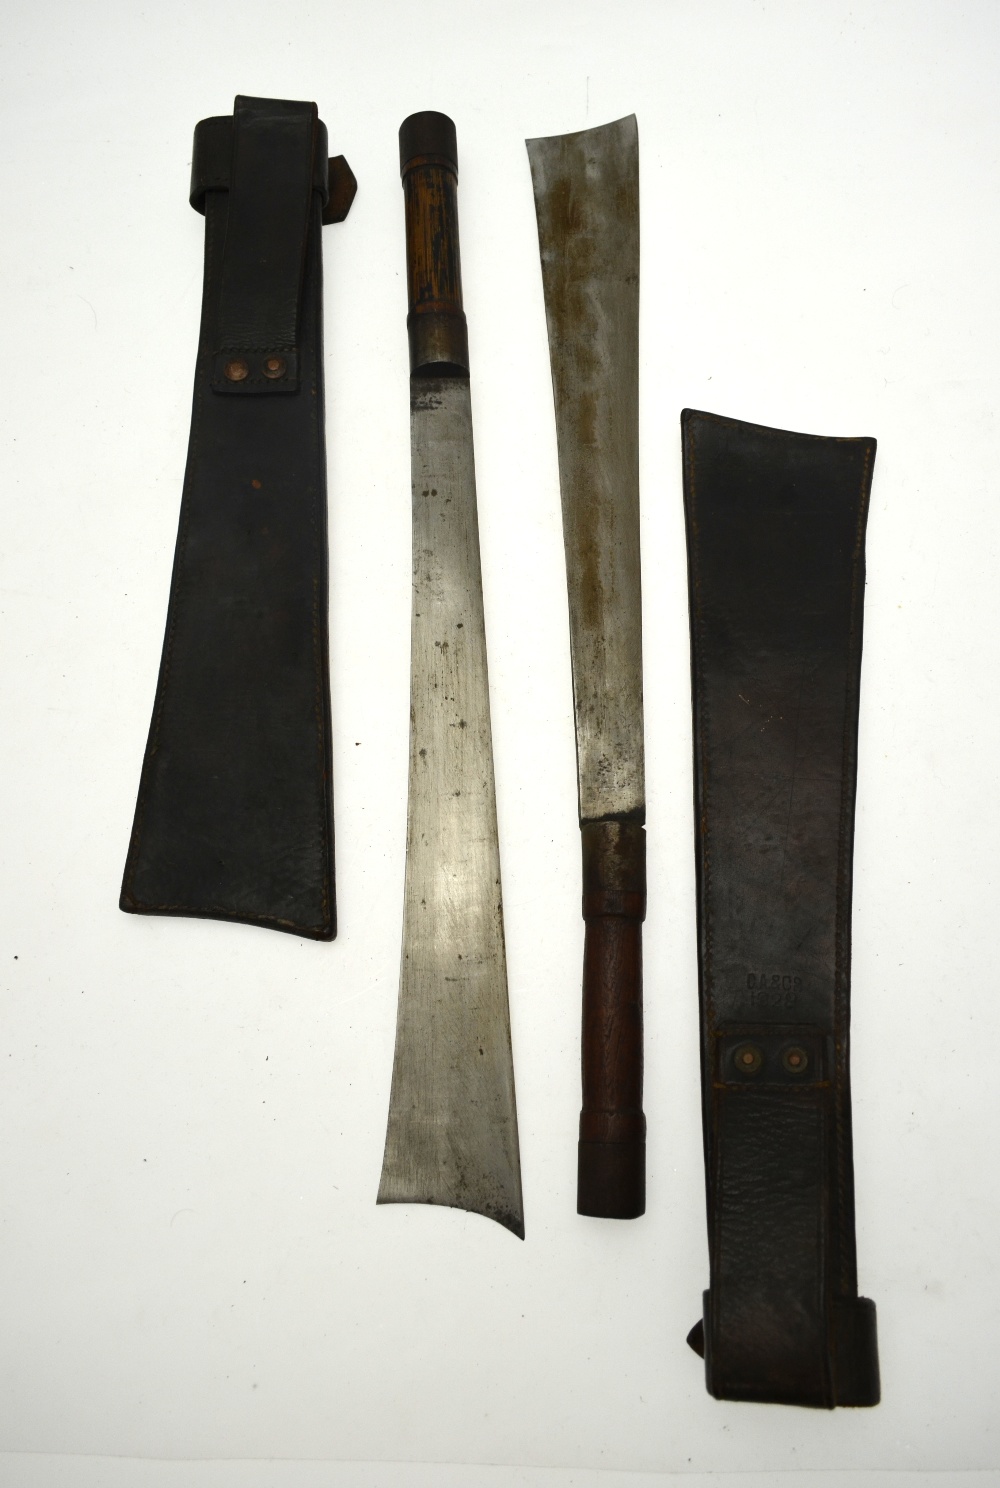 Two Naga Dao (N Assam) swords Dha with 37 cm flared blades and bamboo handles, - Image 4 of 5